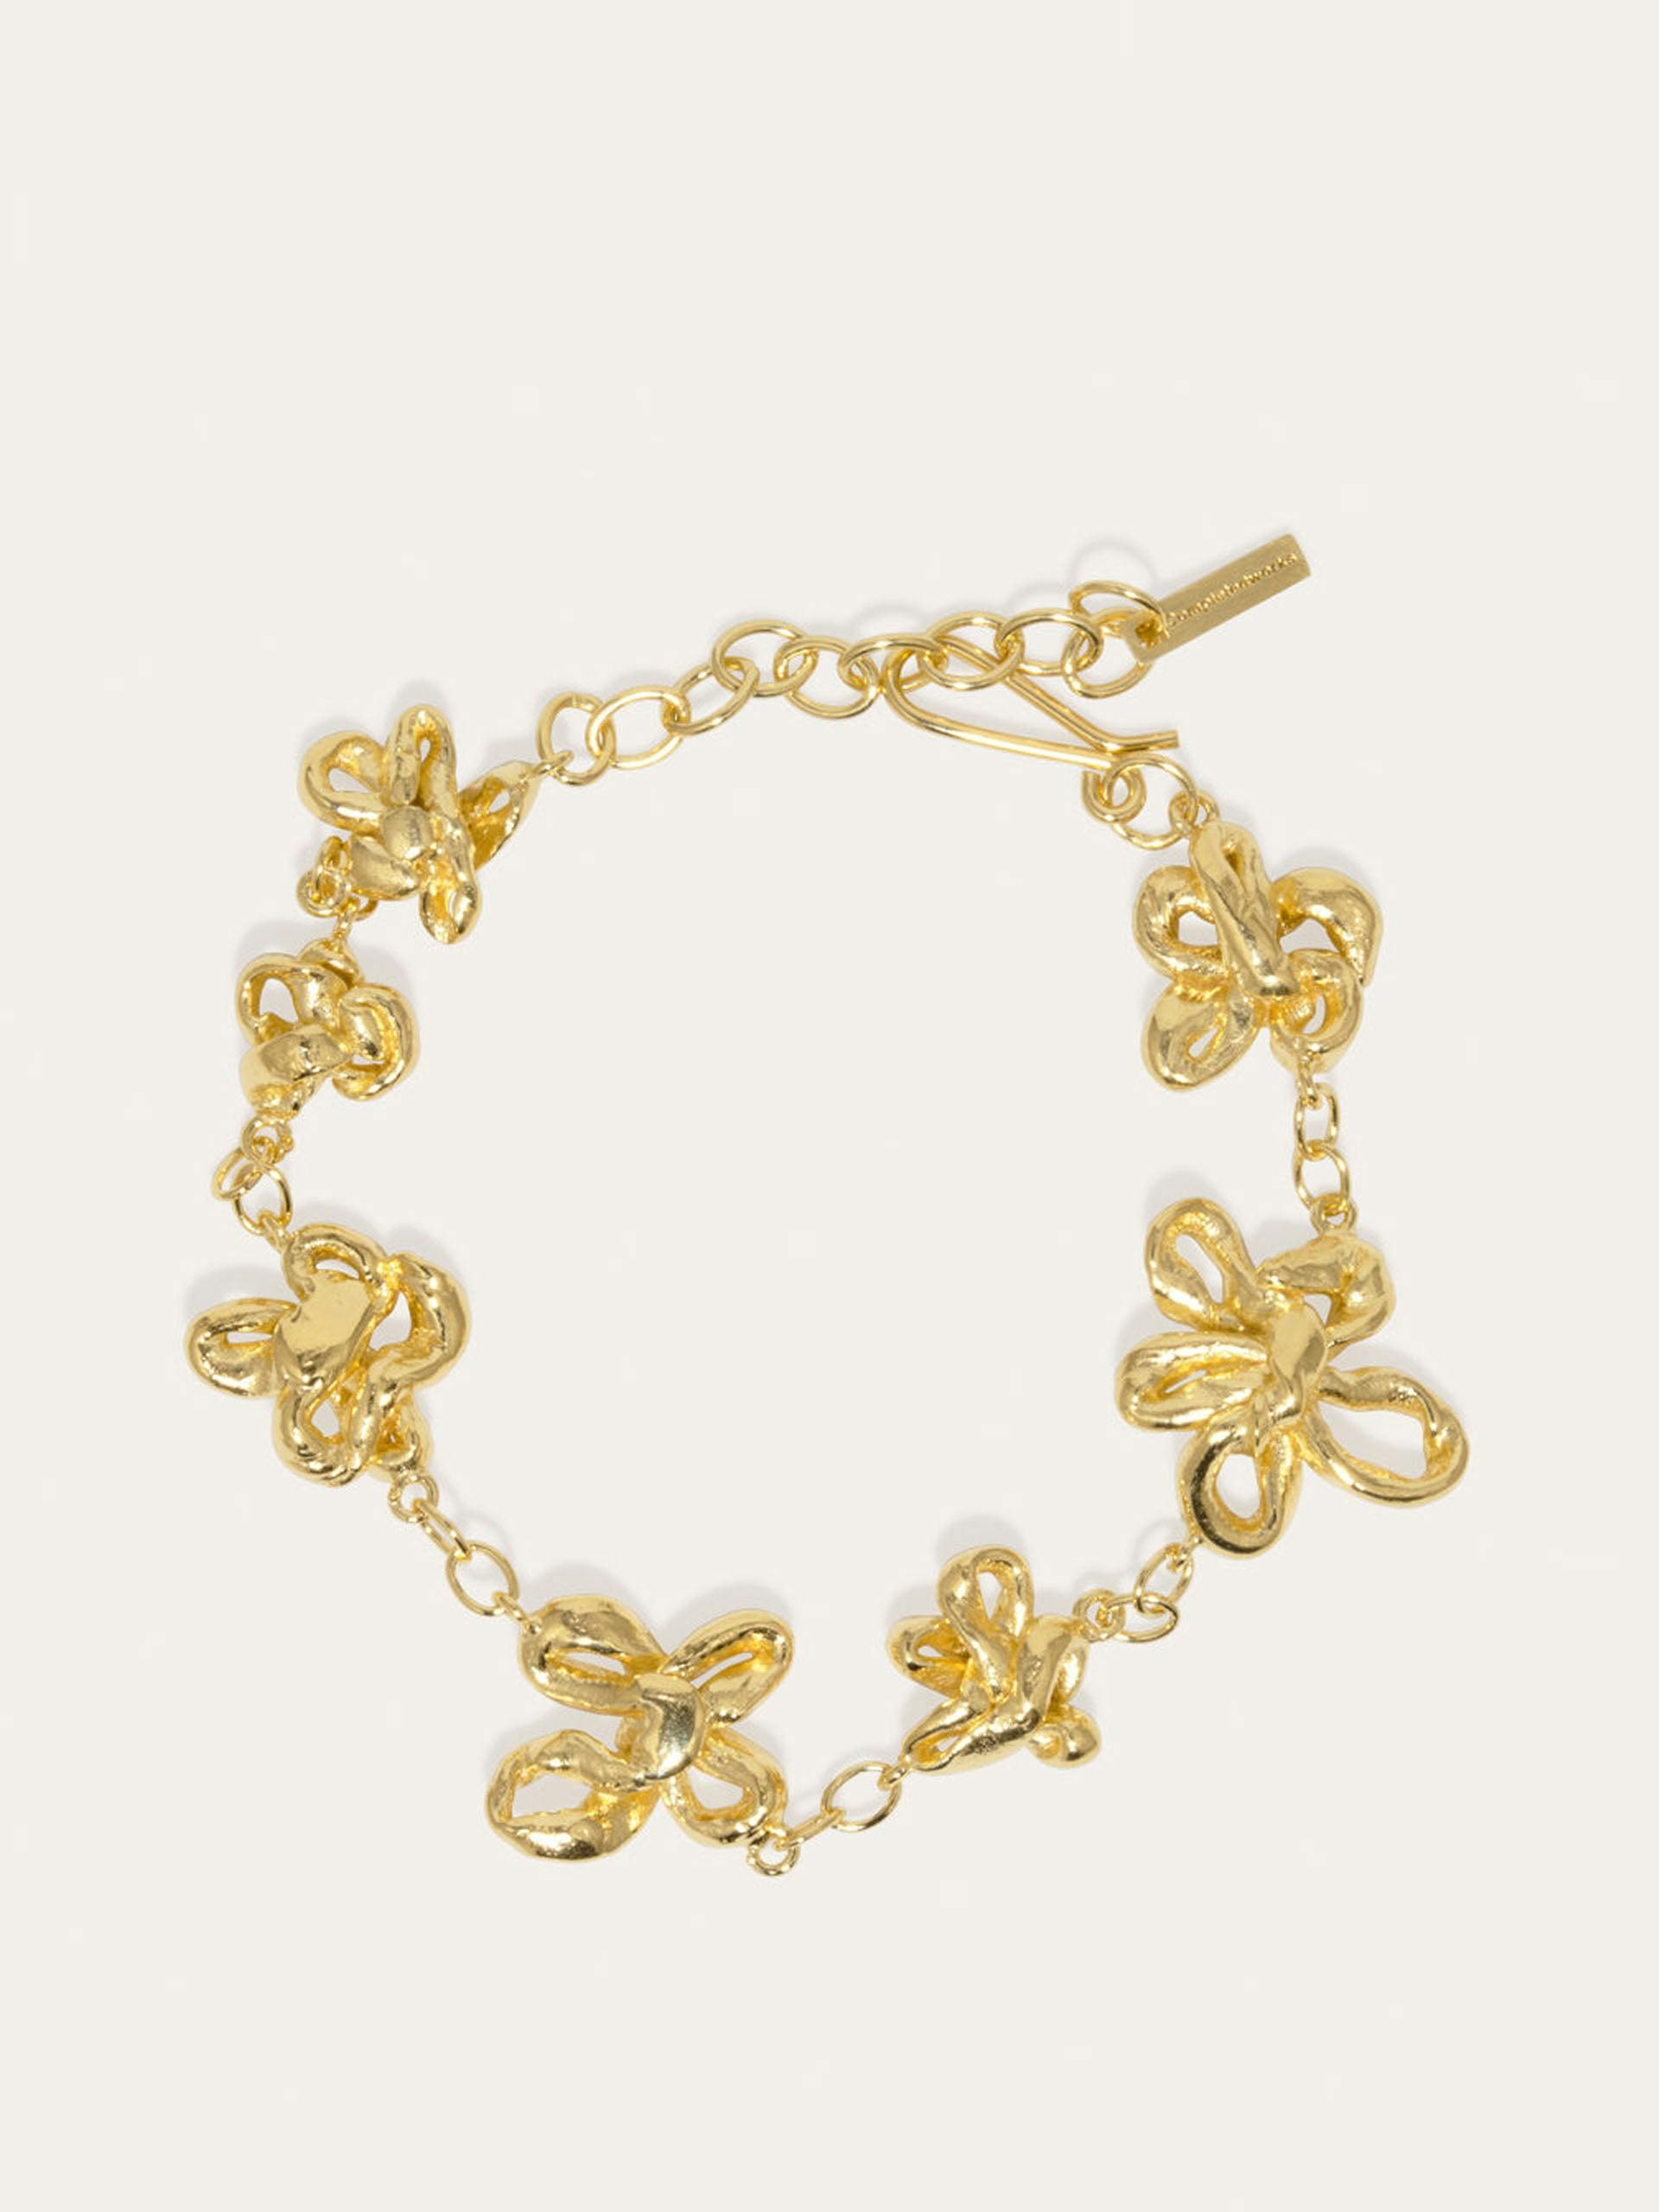 The Past Within The Present gold plated bracelet